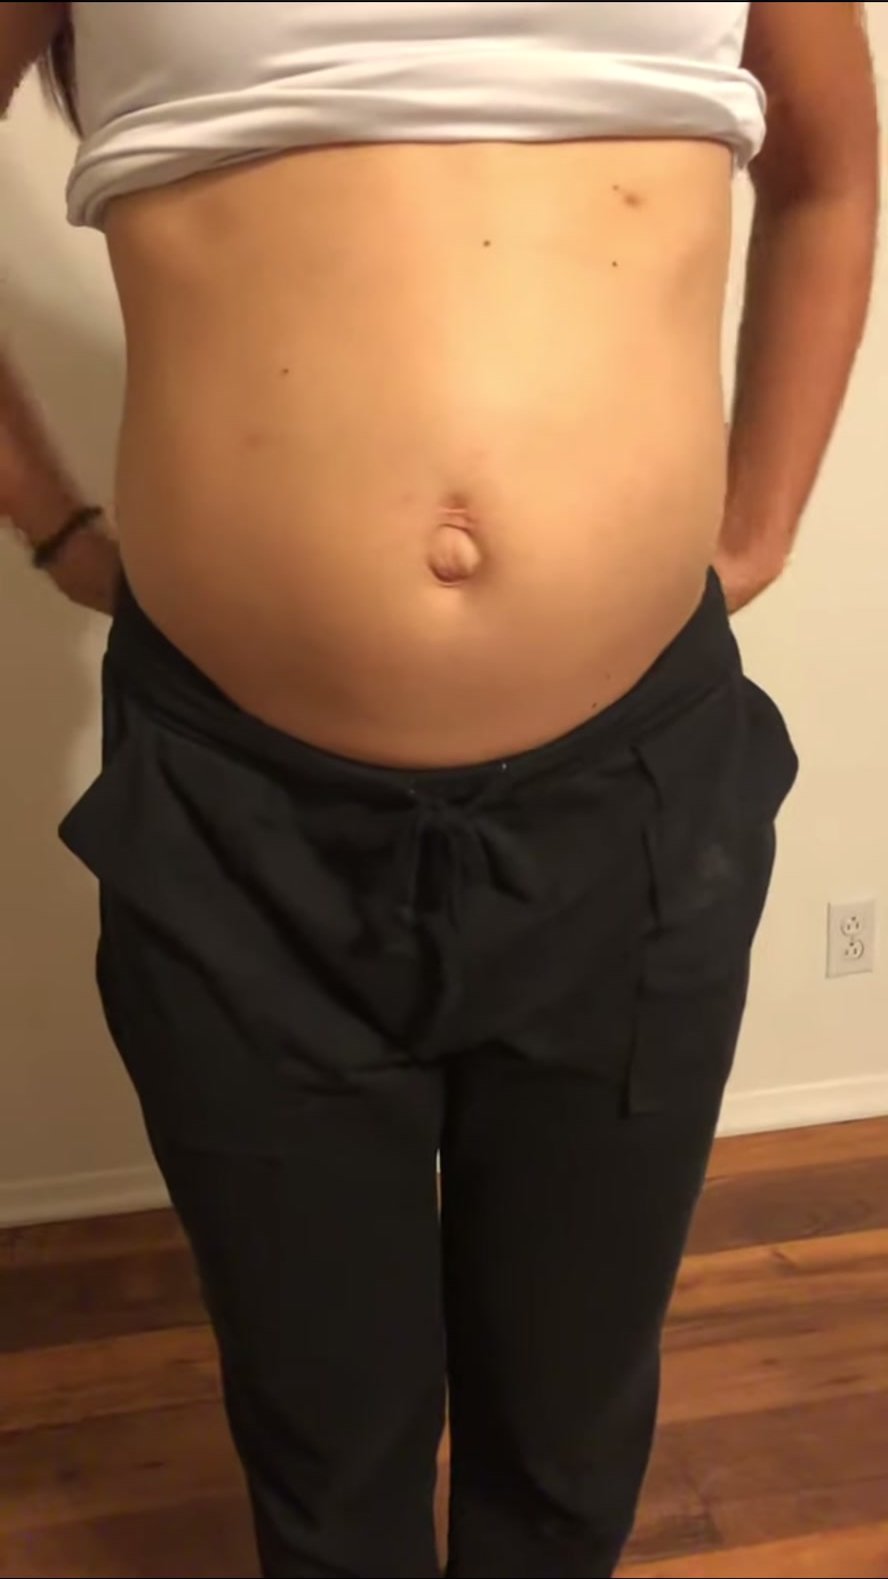 Skinny stuffed belly about to burst